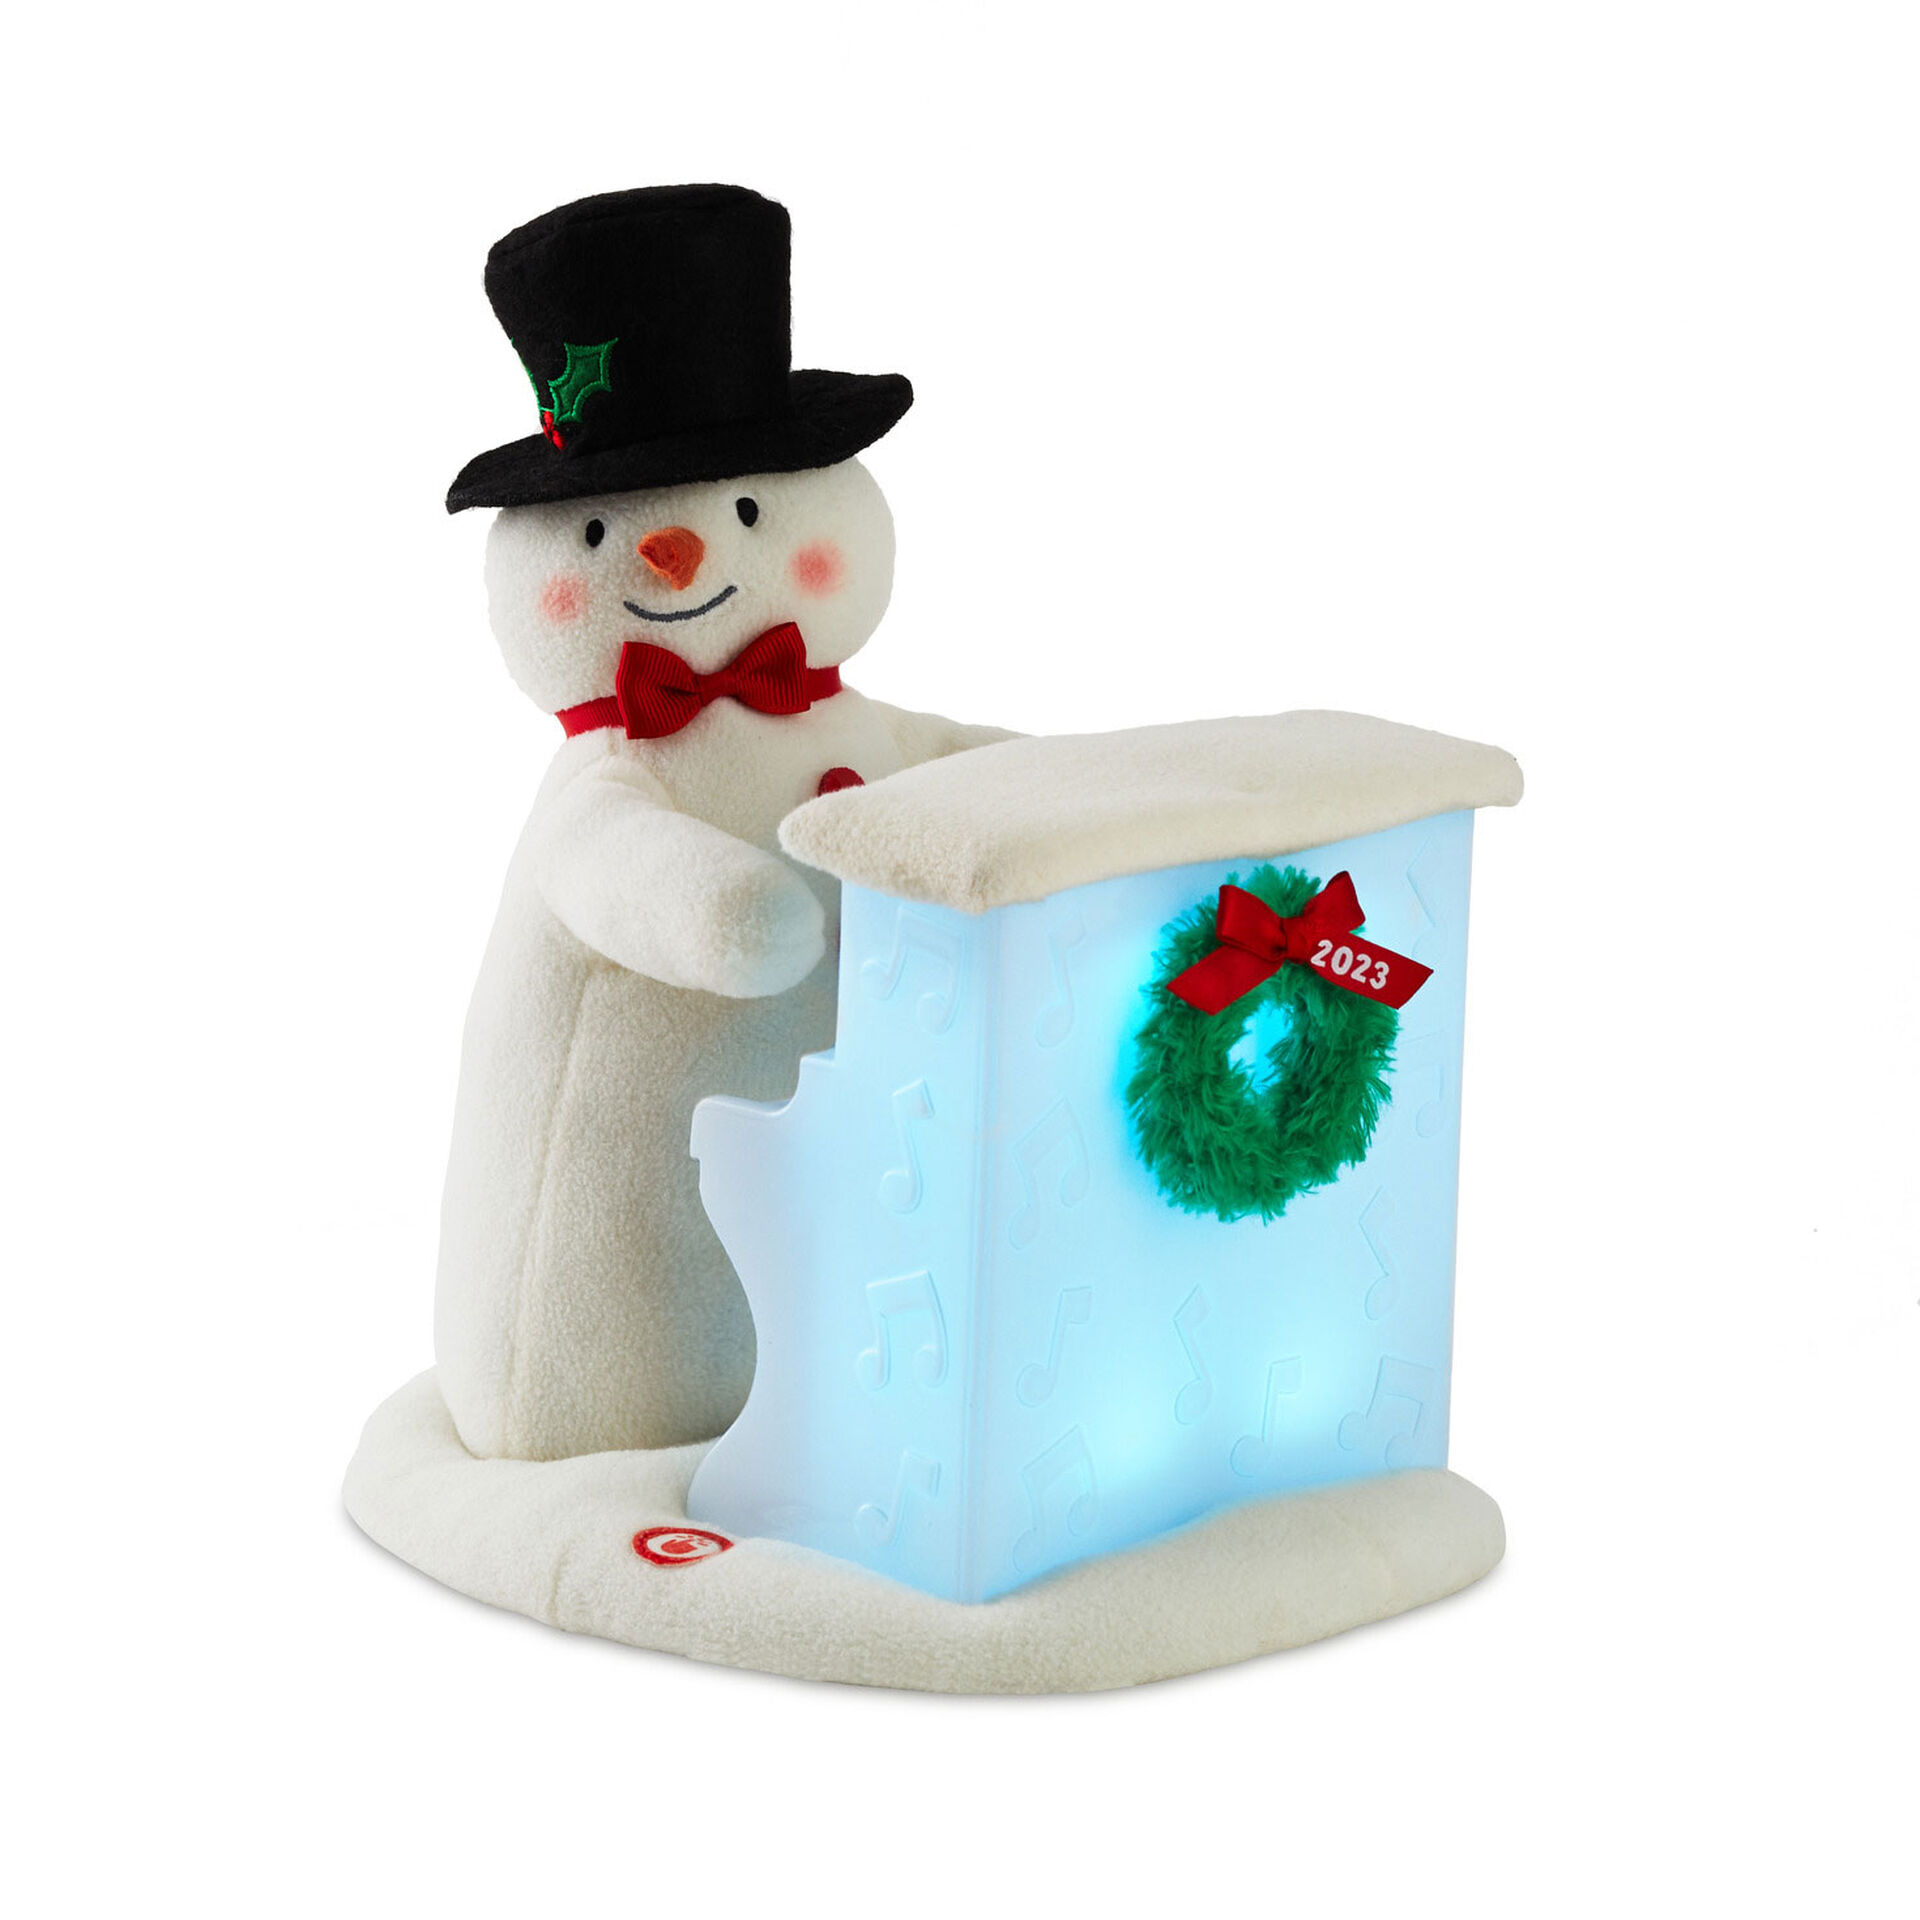 20th Anniversary SingAlong Showman Snowman Plush With Sound, Light and